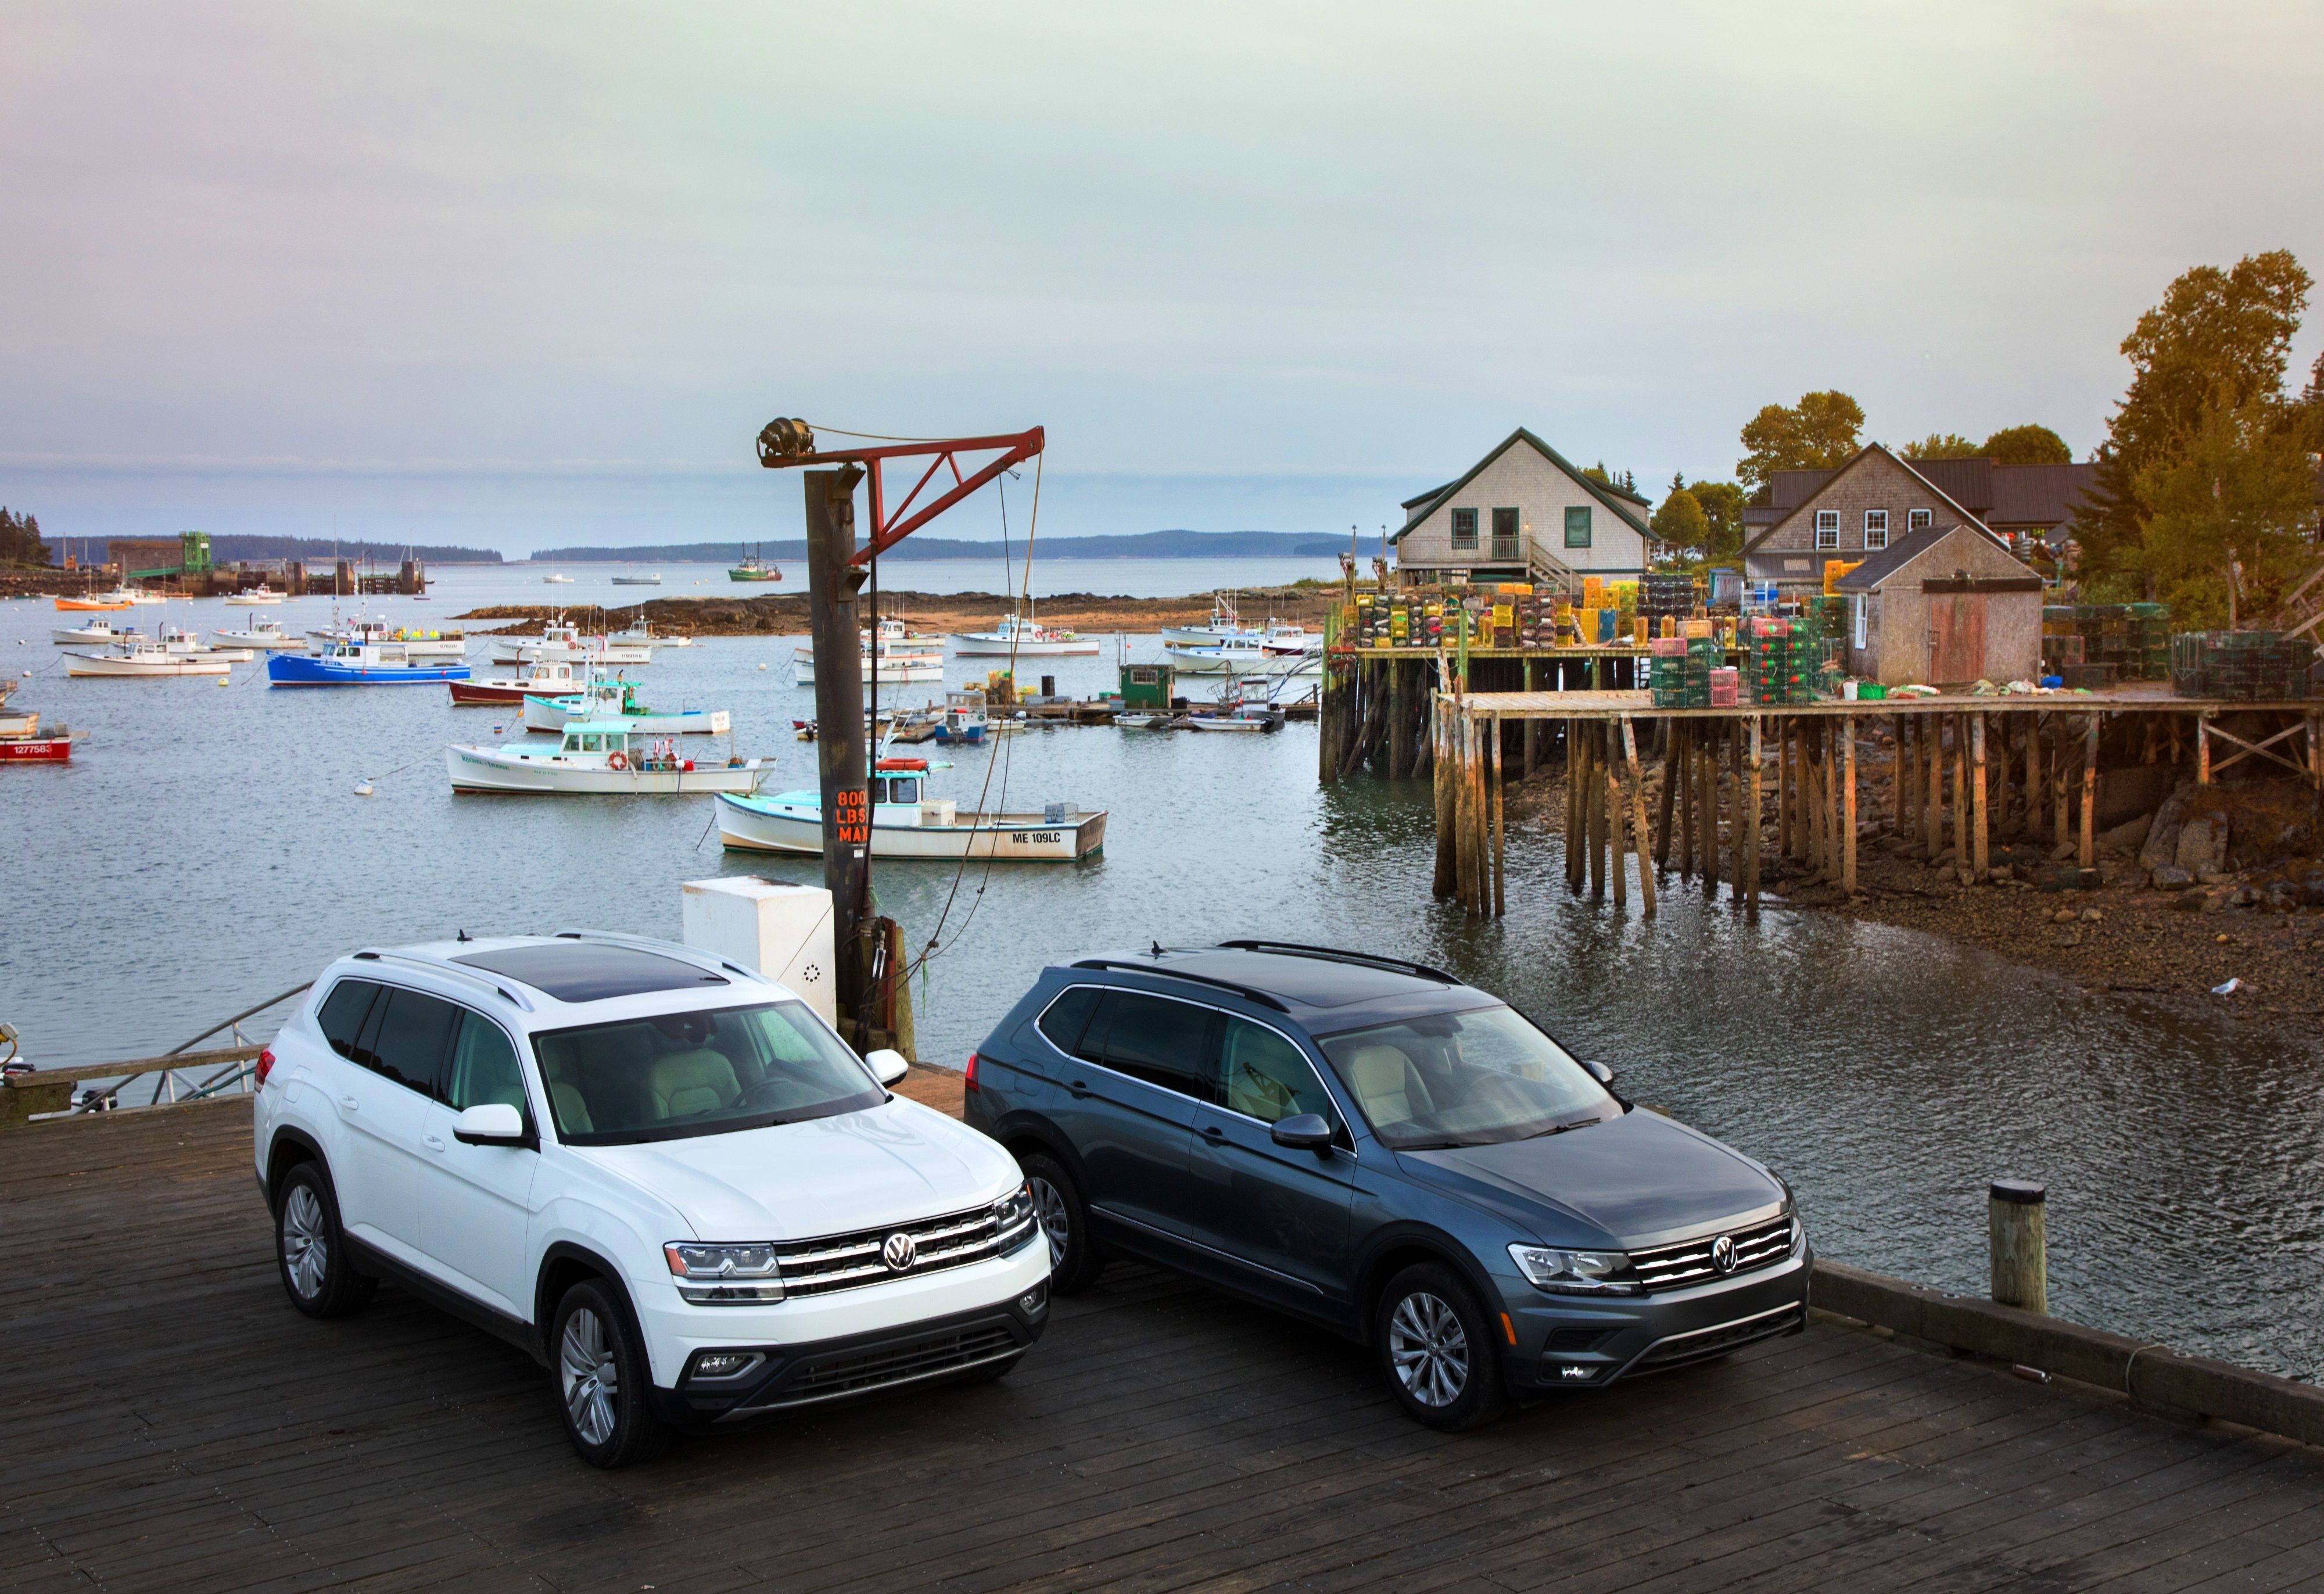 A Girls Guide To Cars | A Tale Of Two Volkswagens - The 2018 Atlas And Tiguan 7 Passenger Suvs - Vw Maine 1963Taleof2Vws